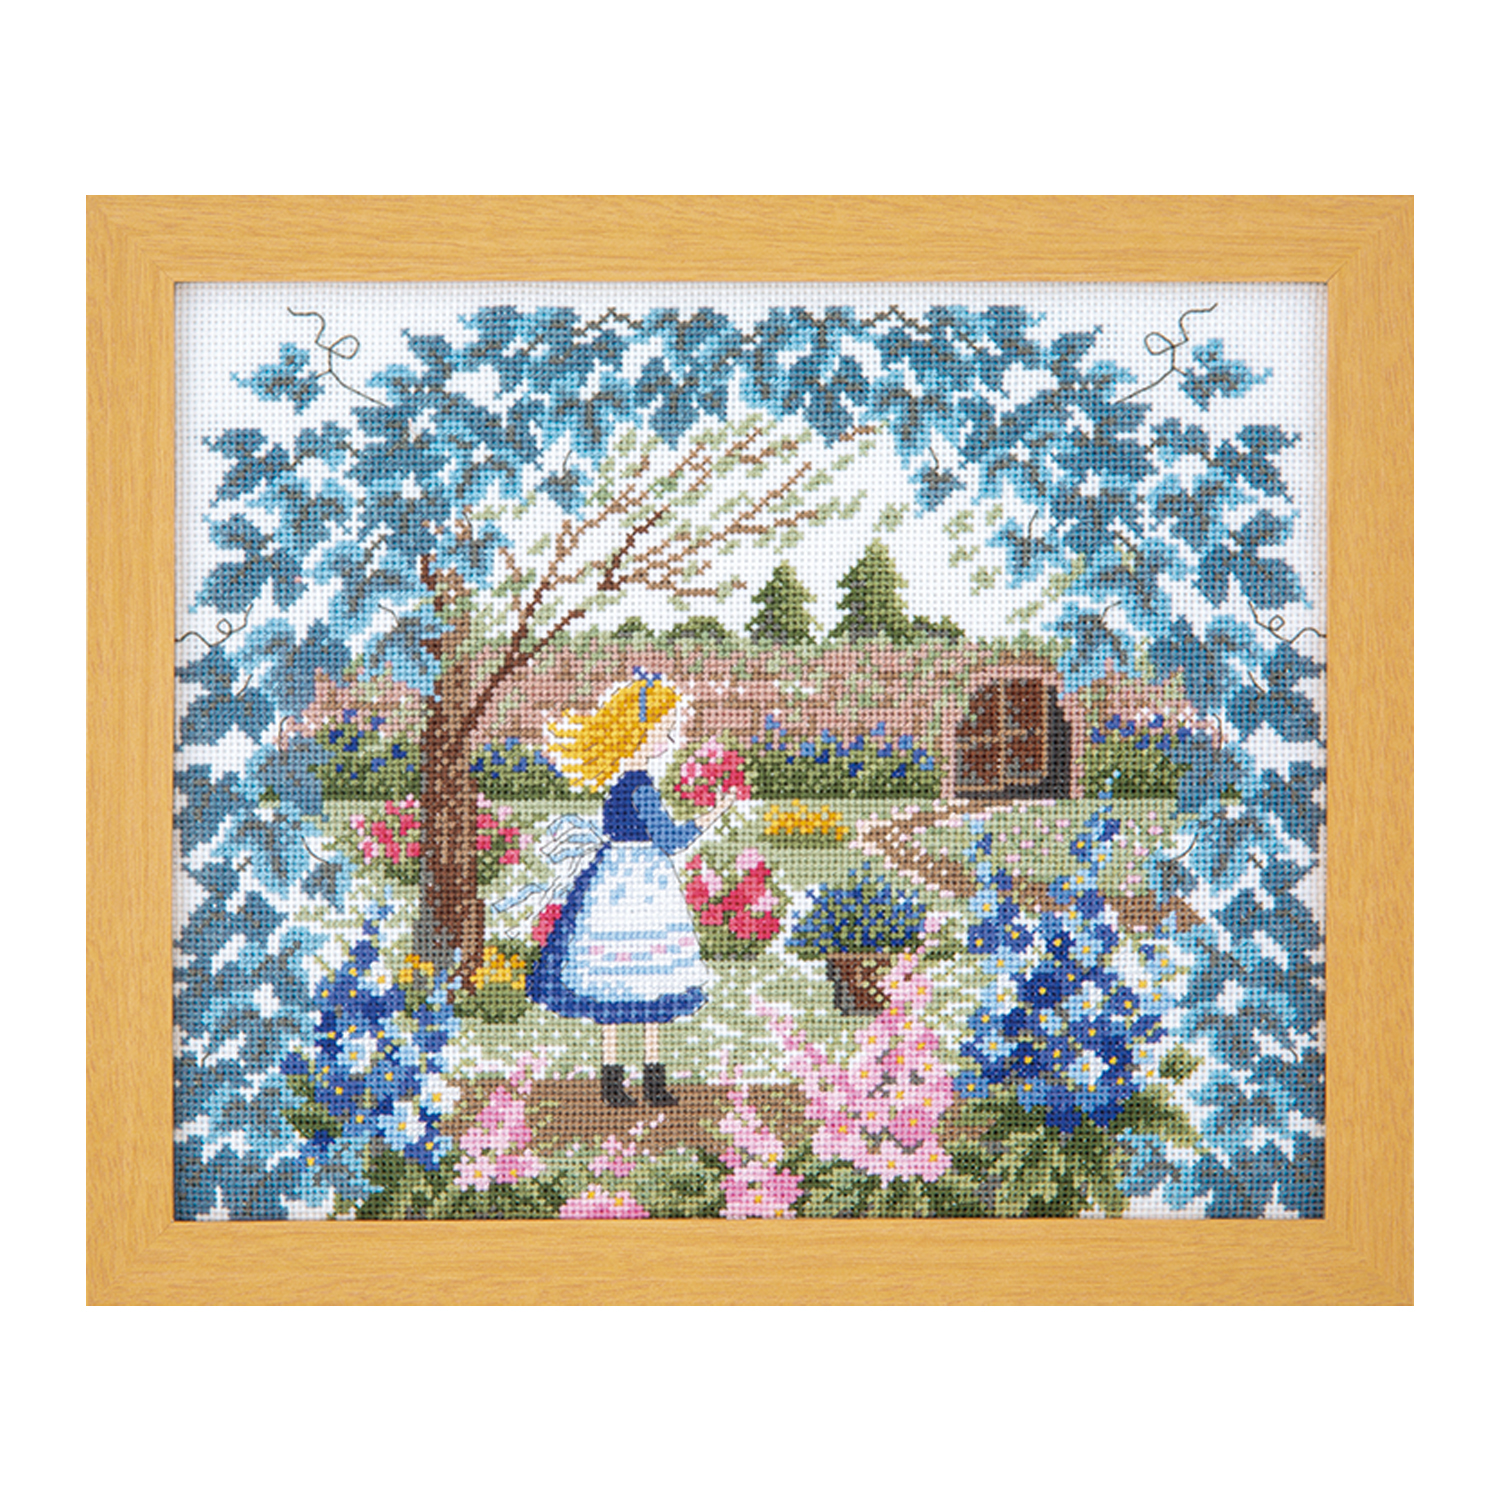 Stories of Flowers and girl, Embroidery, Products information 